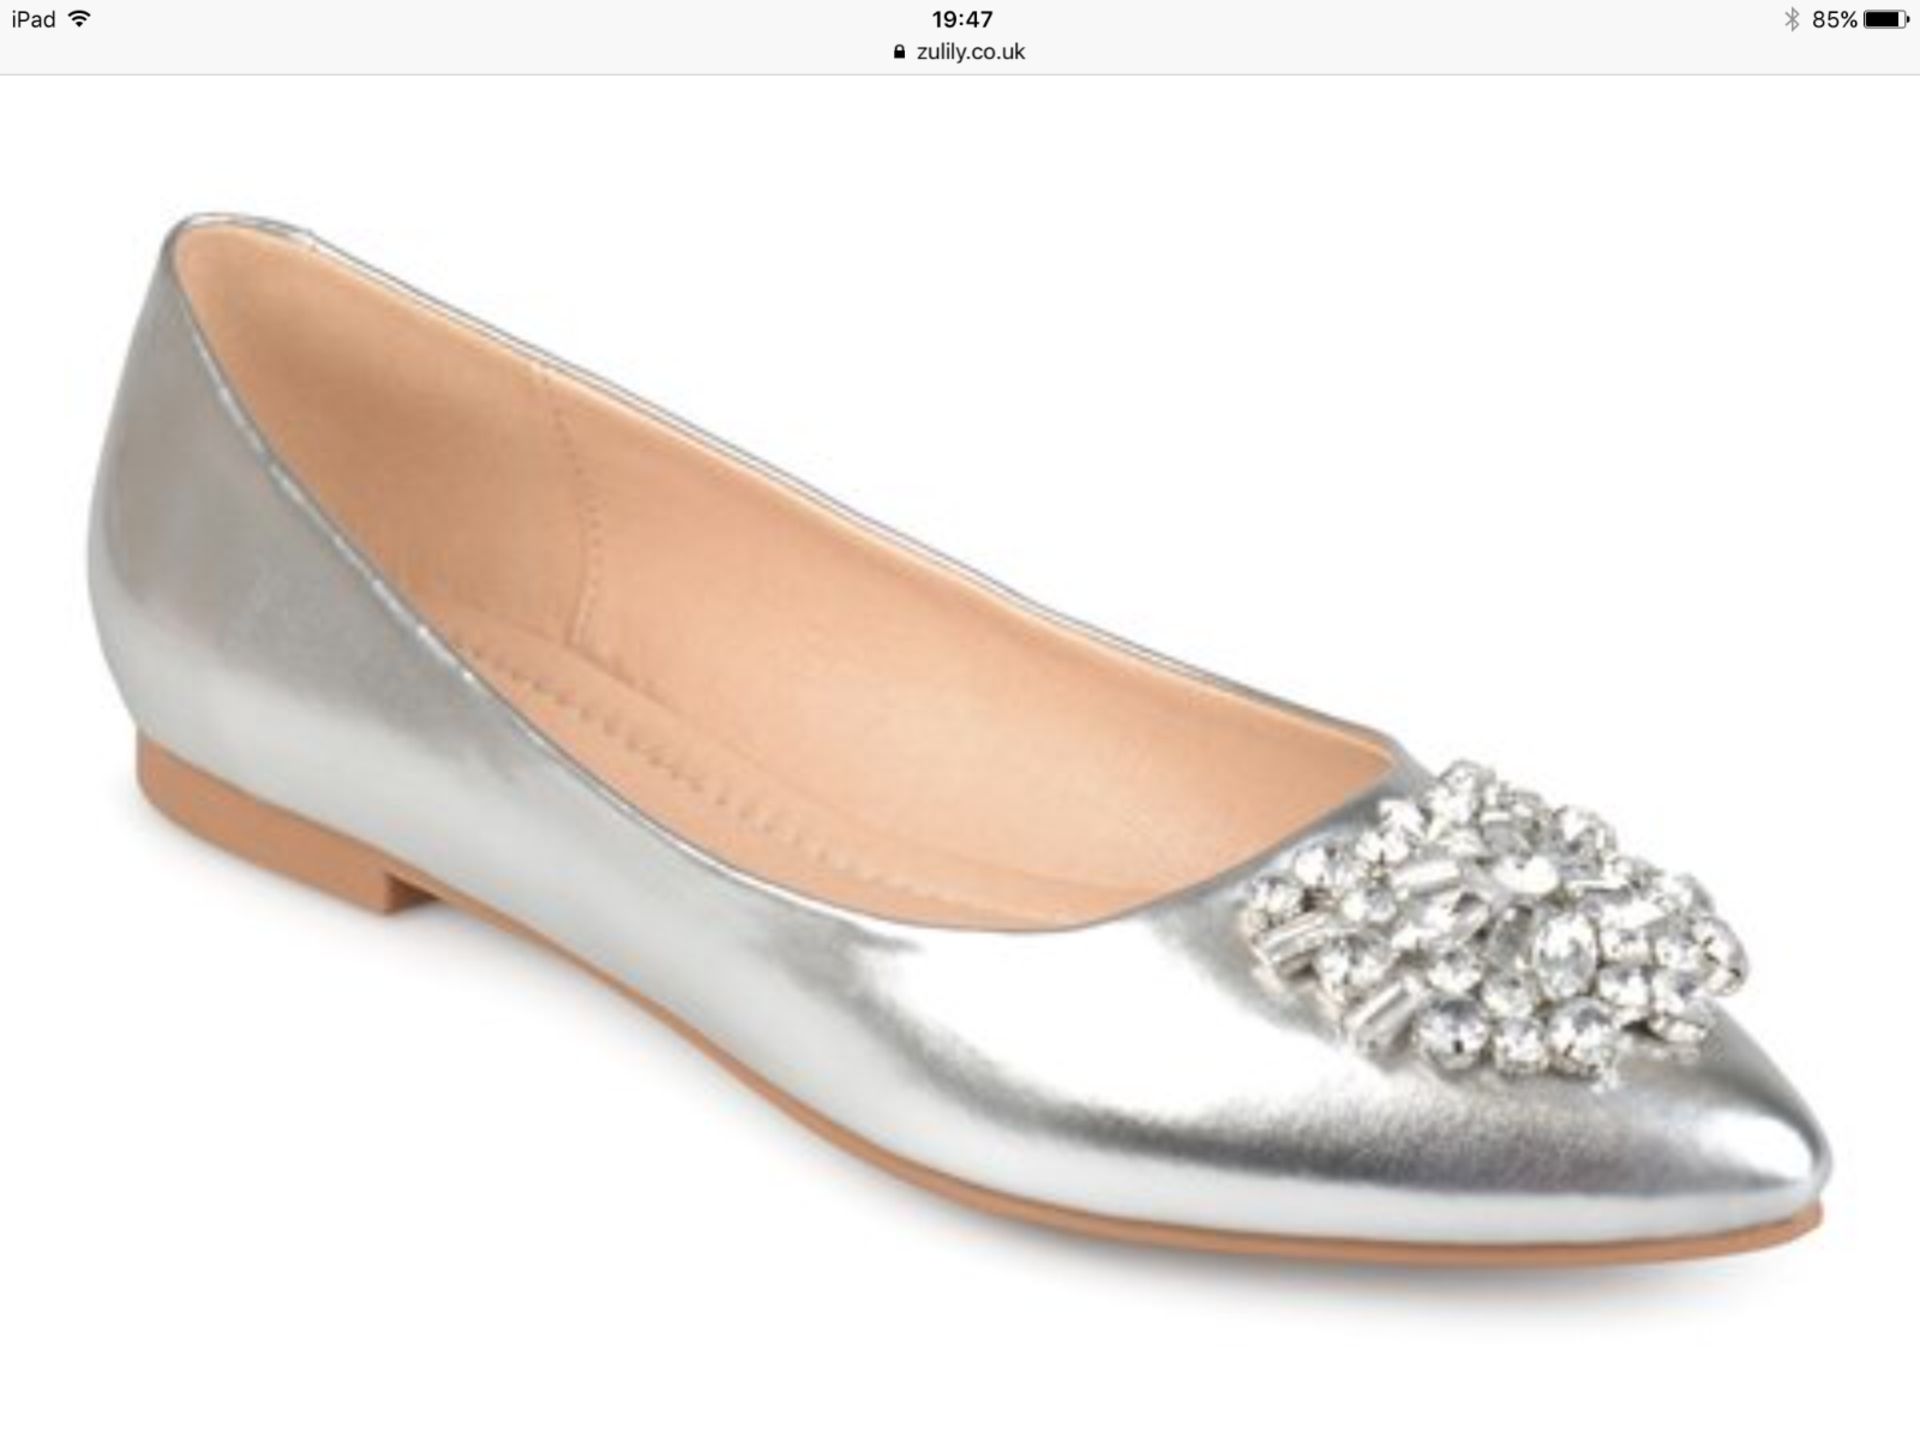 Bella Cora Silver Rena Ballet Flat, Size Uk 4.5 Us 7 (New With Box) [Ref: 53391740 G4]-Tf